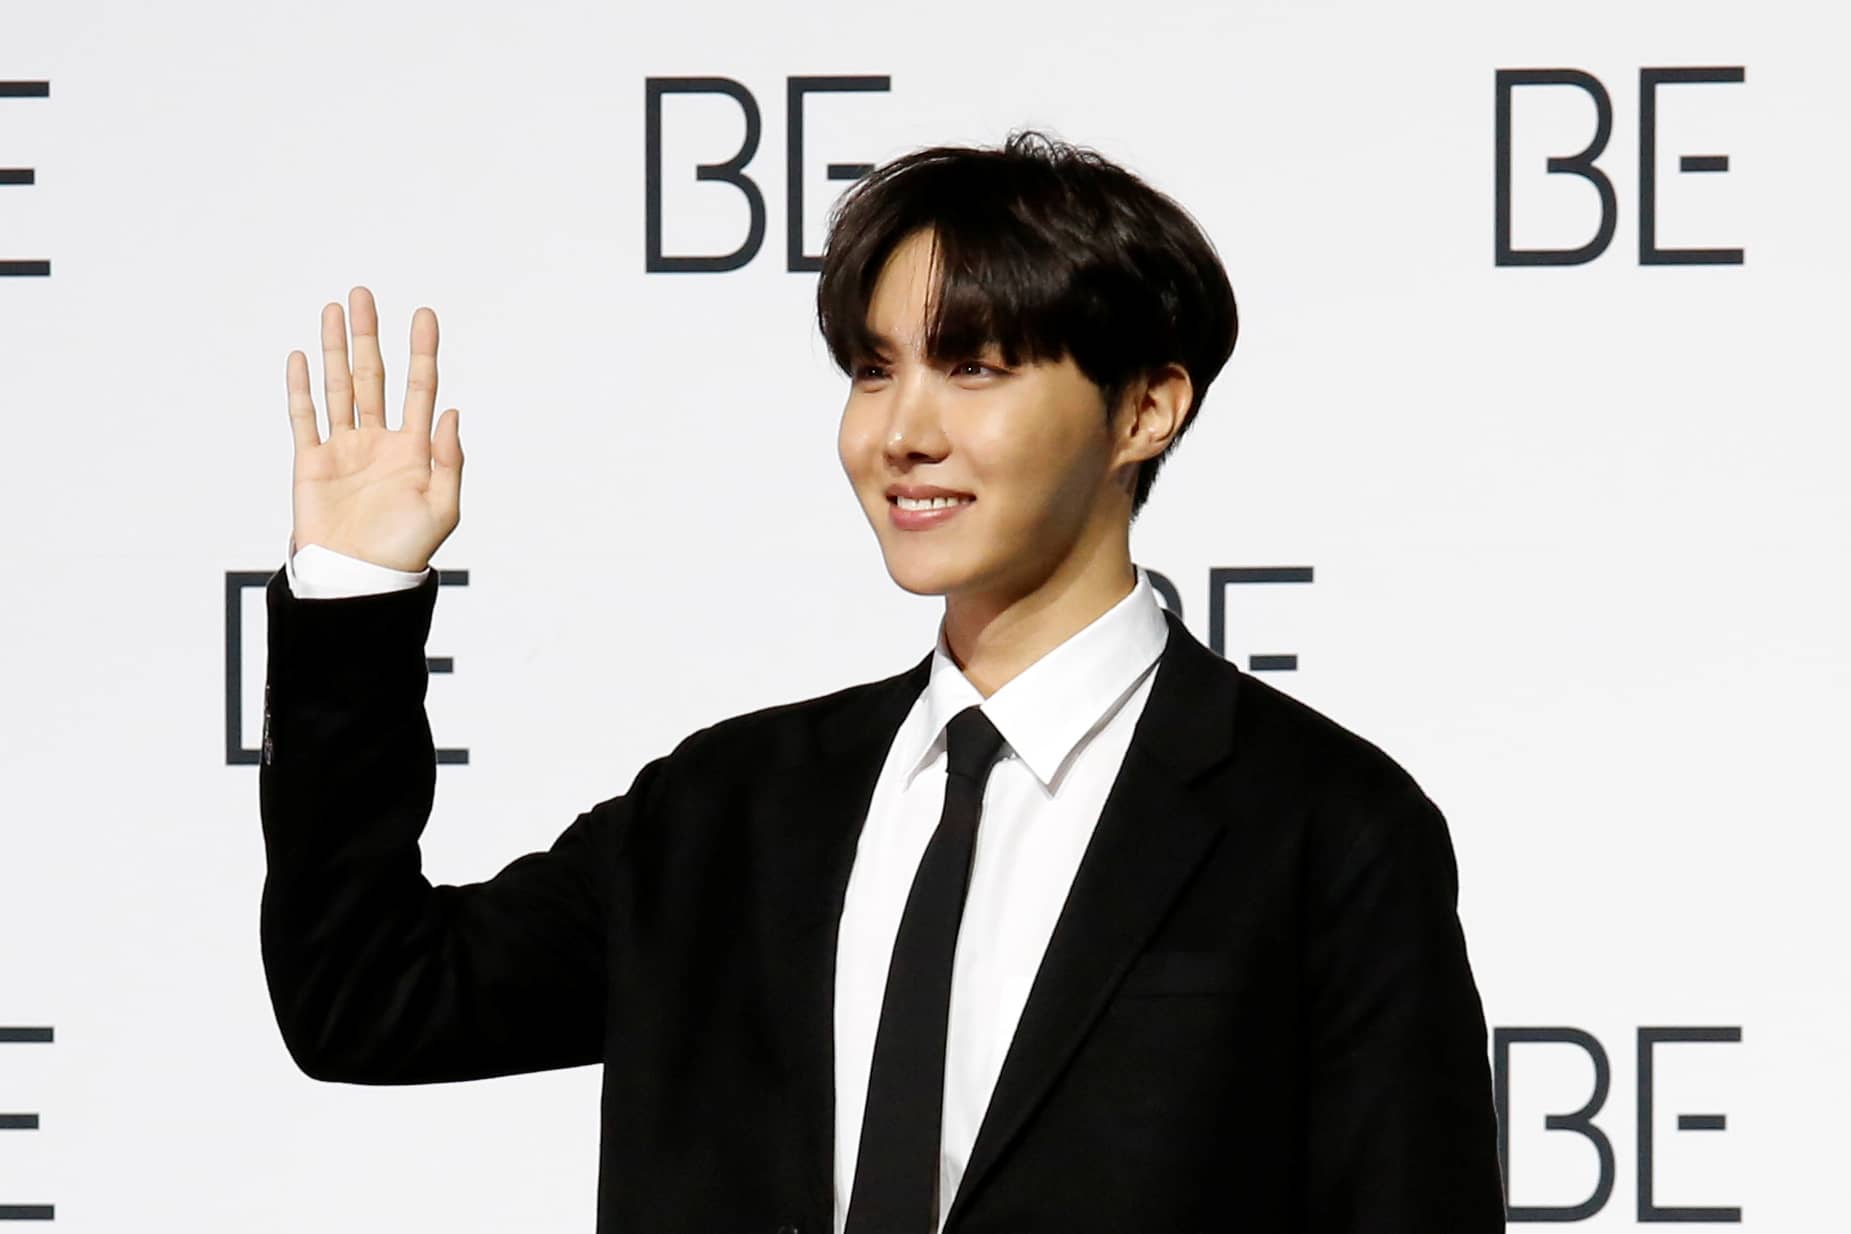 k-pop-boy-band-bts-member-j-hope-poses-for-photograph-during-a-news-conference-promoting-their-new-album-bedeluxe-edition-in-seoul